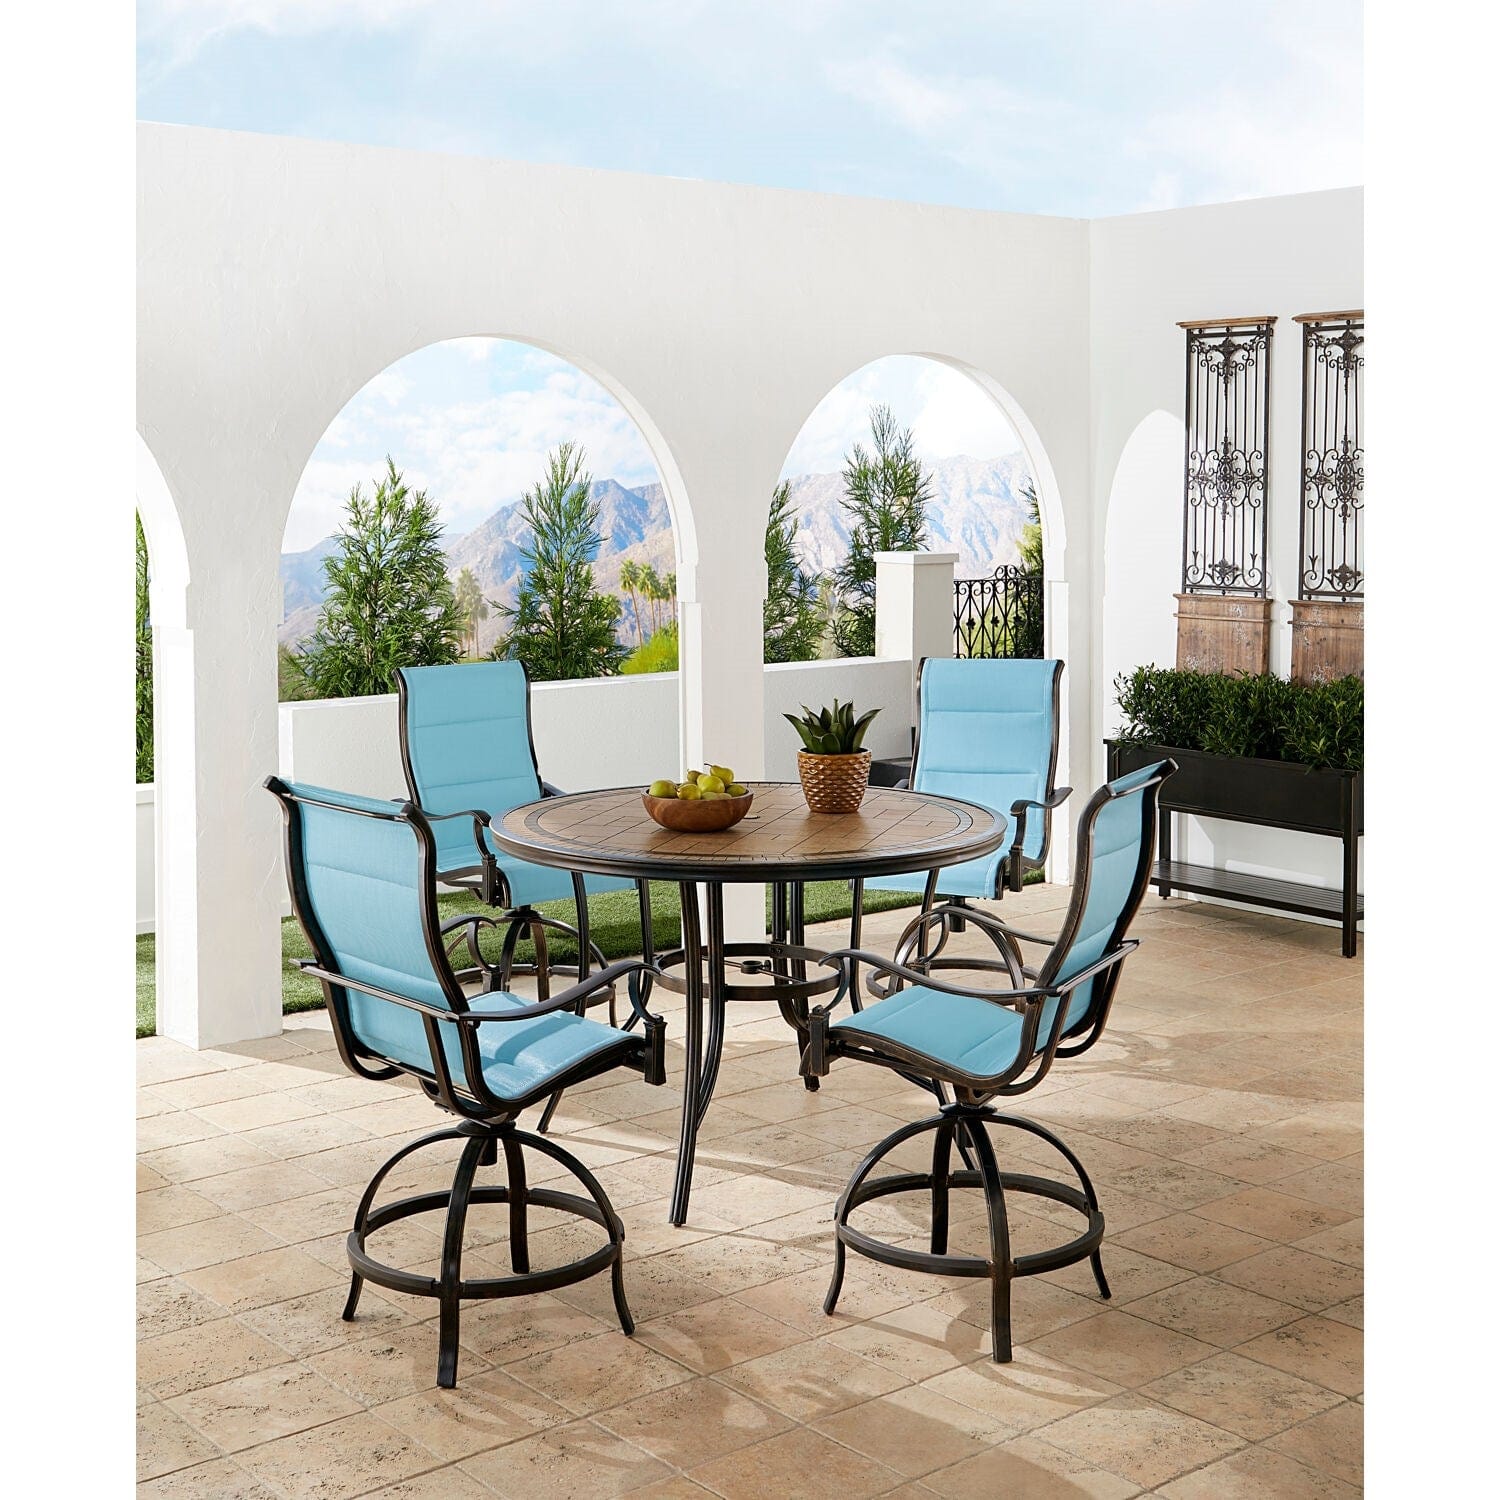 Hanover Outdoor Dining Set Hanover Monaco 5-Piece High-Dining Set in Blue with 4 Padded Counter-Height Swivel Chairs and a 56-In. Tile-Top Table | MONDN5PCPDBR-C-BLU